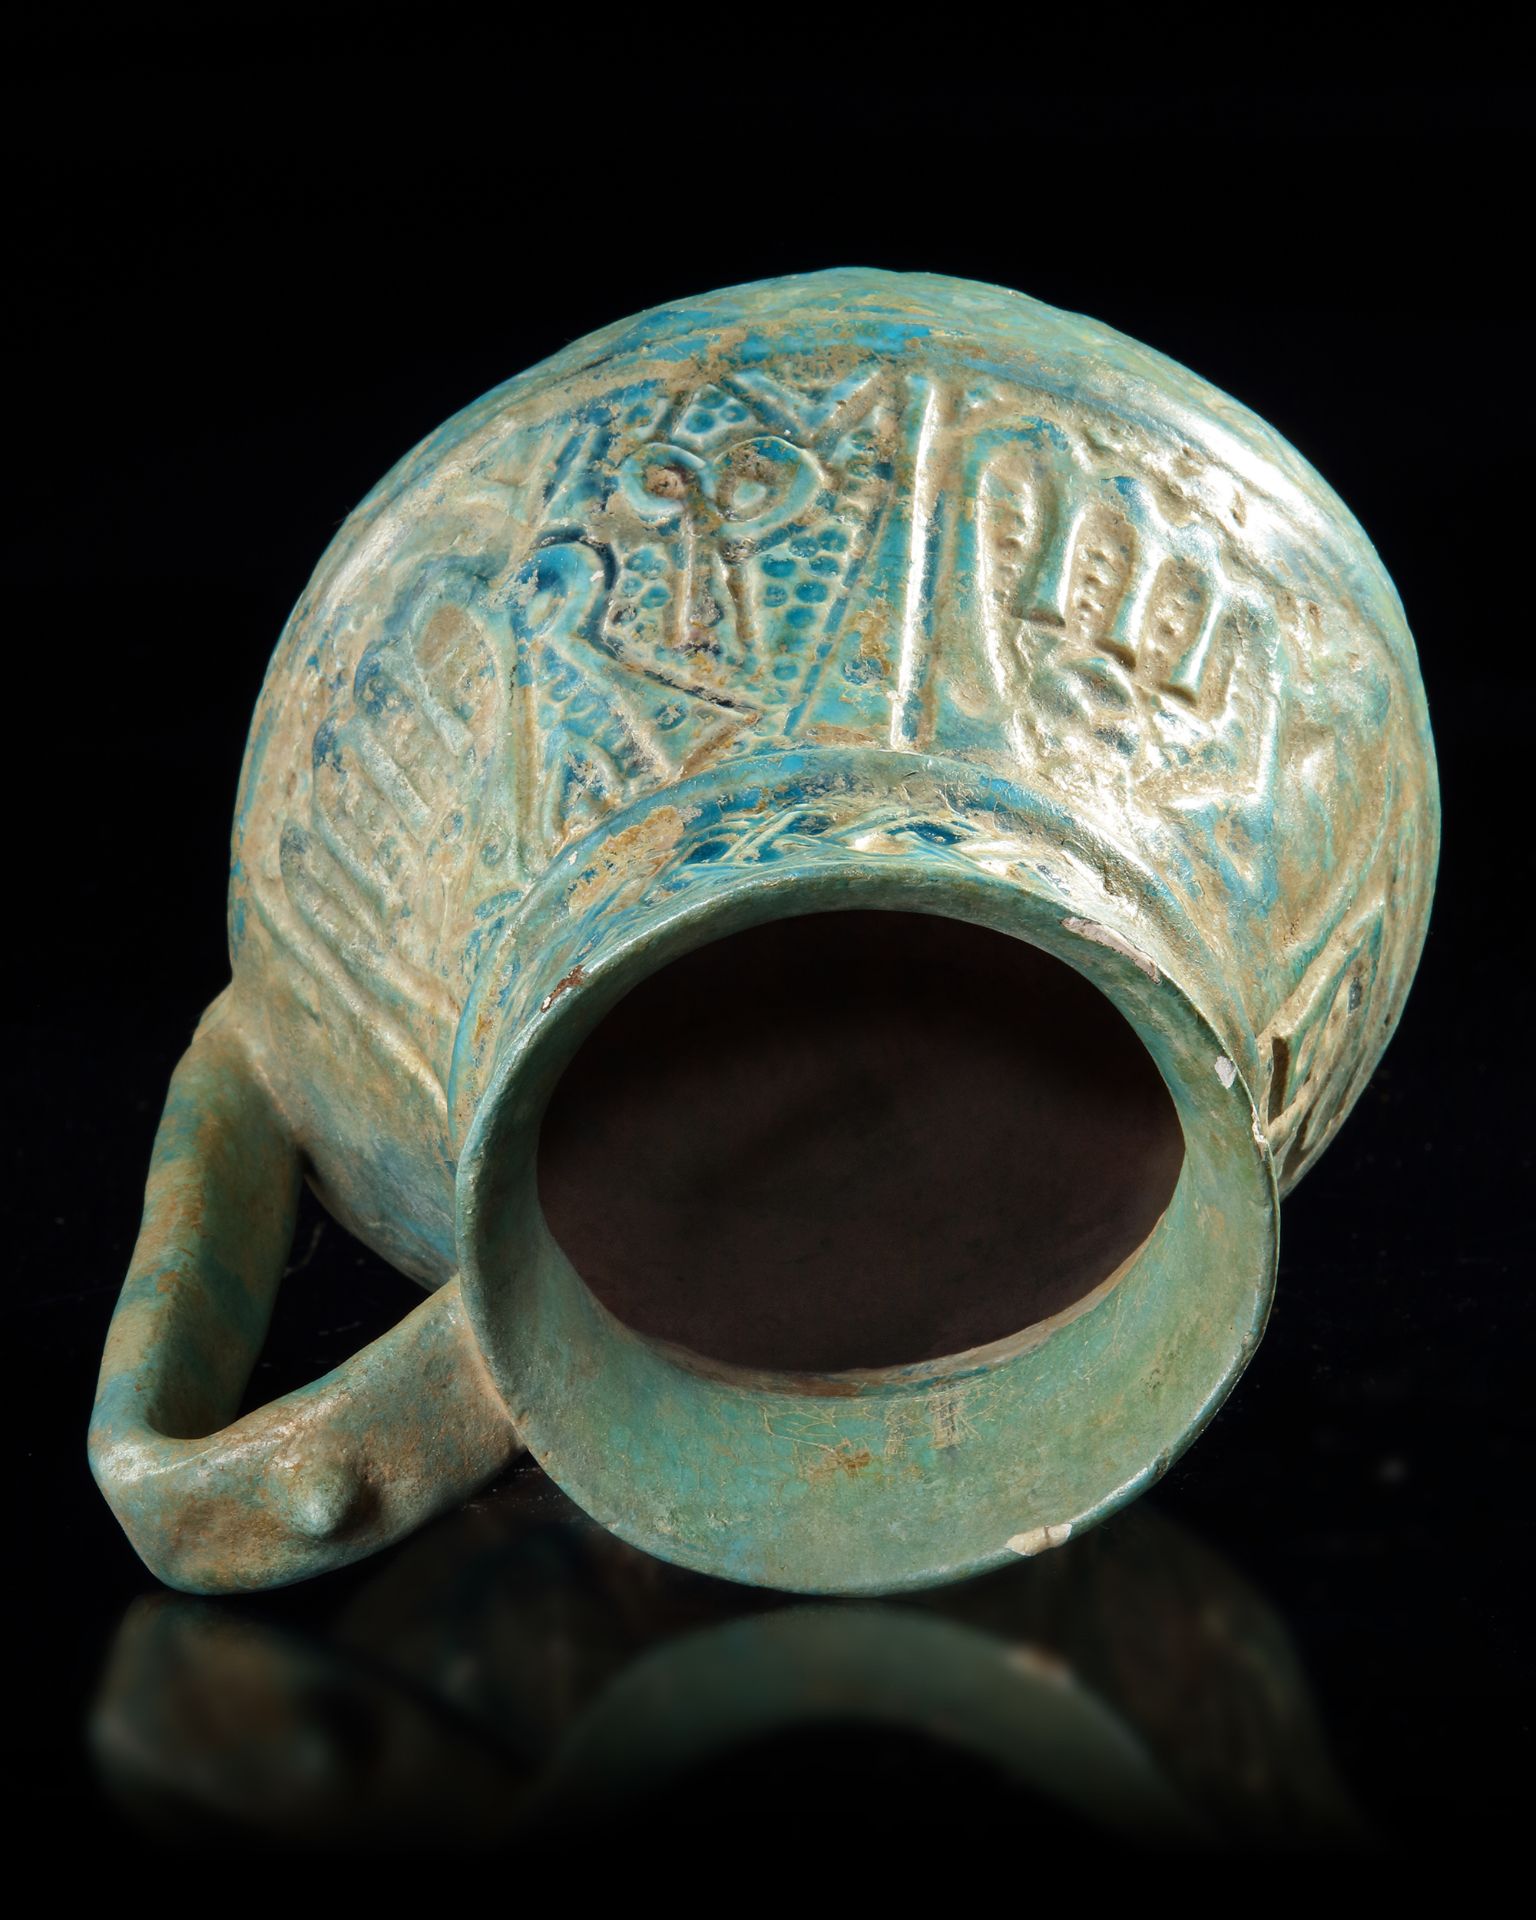 A TURQUOISE GLAZED POTTERY EWER, PROBABLY NISHAPUR, 12TH CENTURY - Image 7 of 8